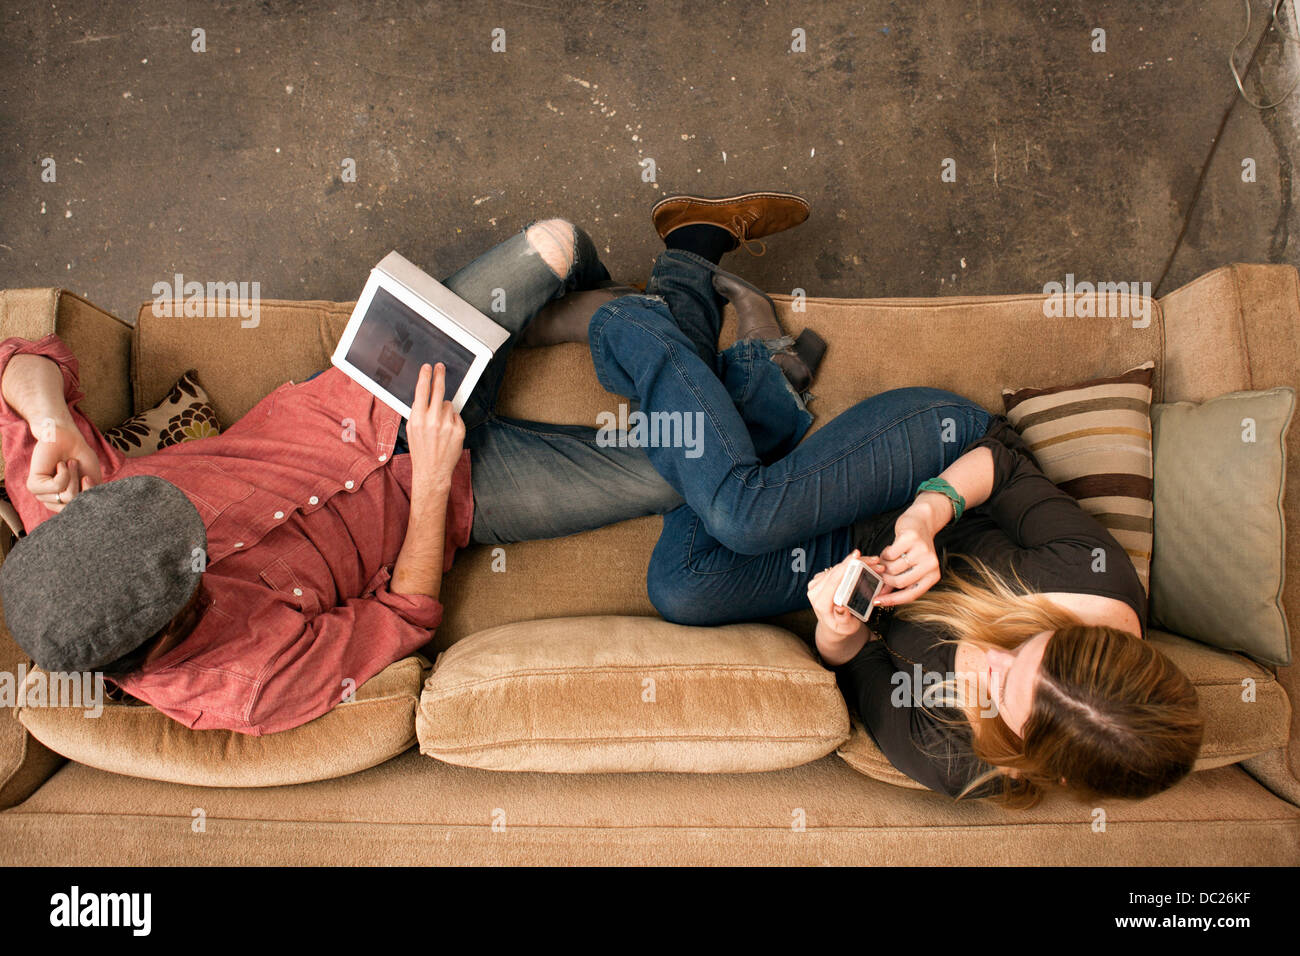 Couple sitting on sofa using digital tablet and smartphone Stock Photo